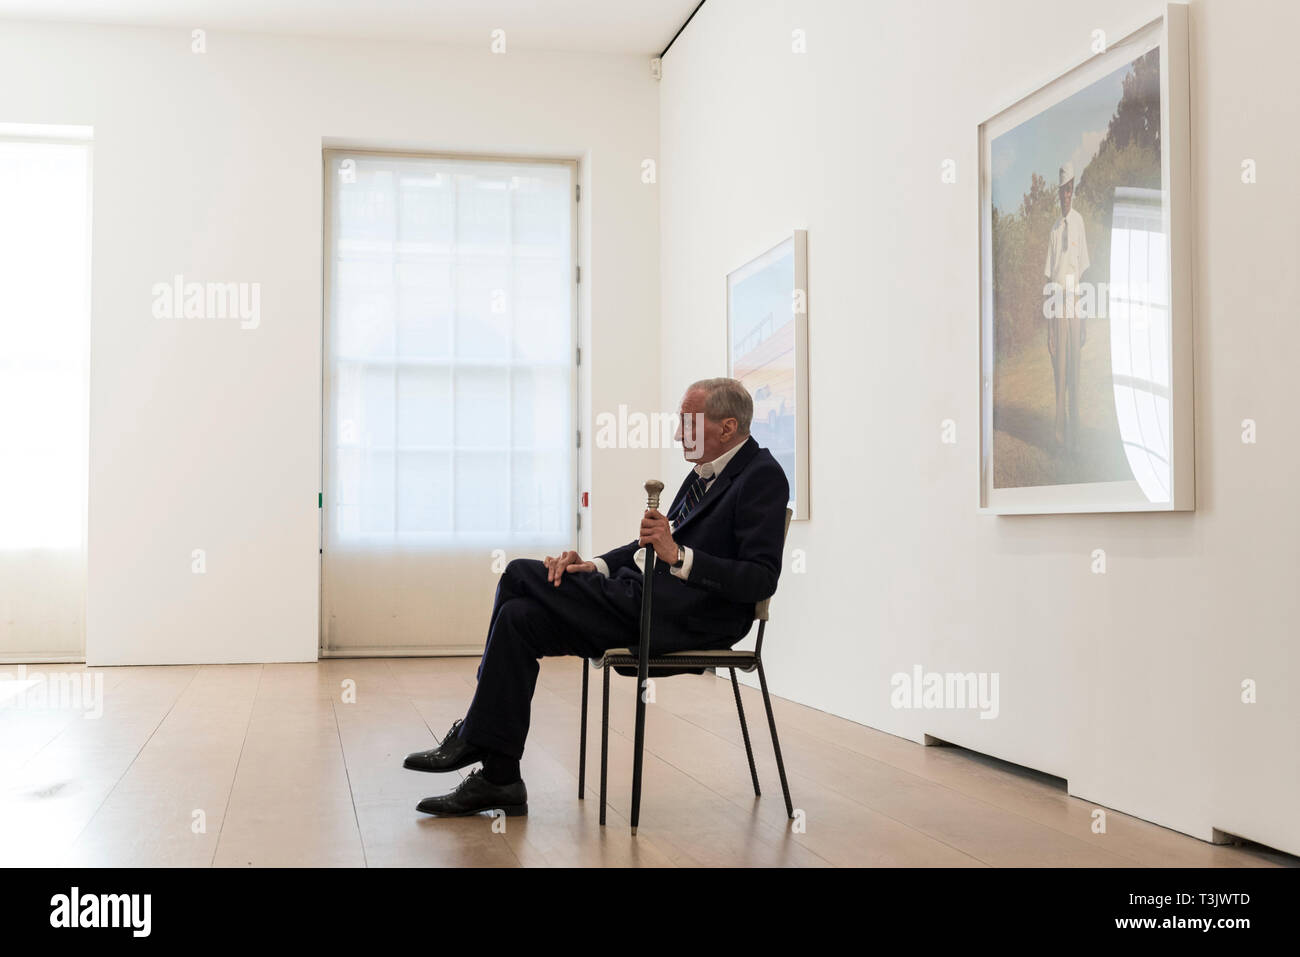 London, UK.  10 April 2019.  American photographer William Eggleston poses in front of his works from his new exhibition '2¼' at the David Zwirner gallery in Mayfair.  The show comprises a series of square-format colour photographs taken around 1977 throughout California and the American South and will run April 12 to June 1, 2019.  Credit: Stephen Chung / Alamy Live News Stock Photo